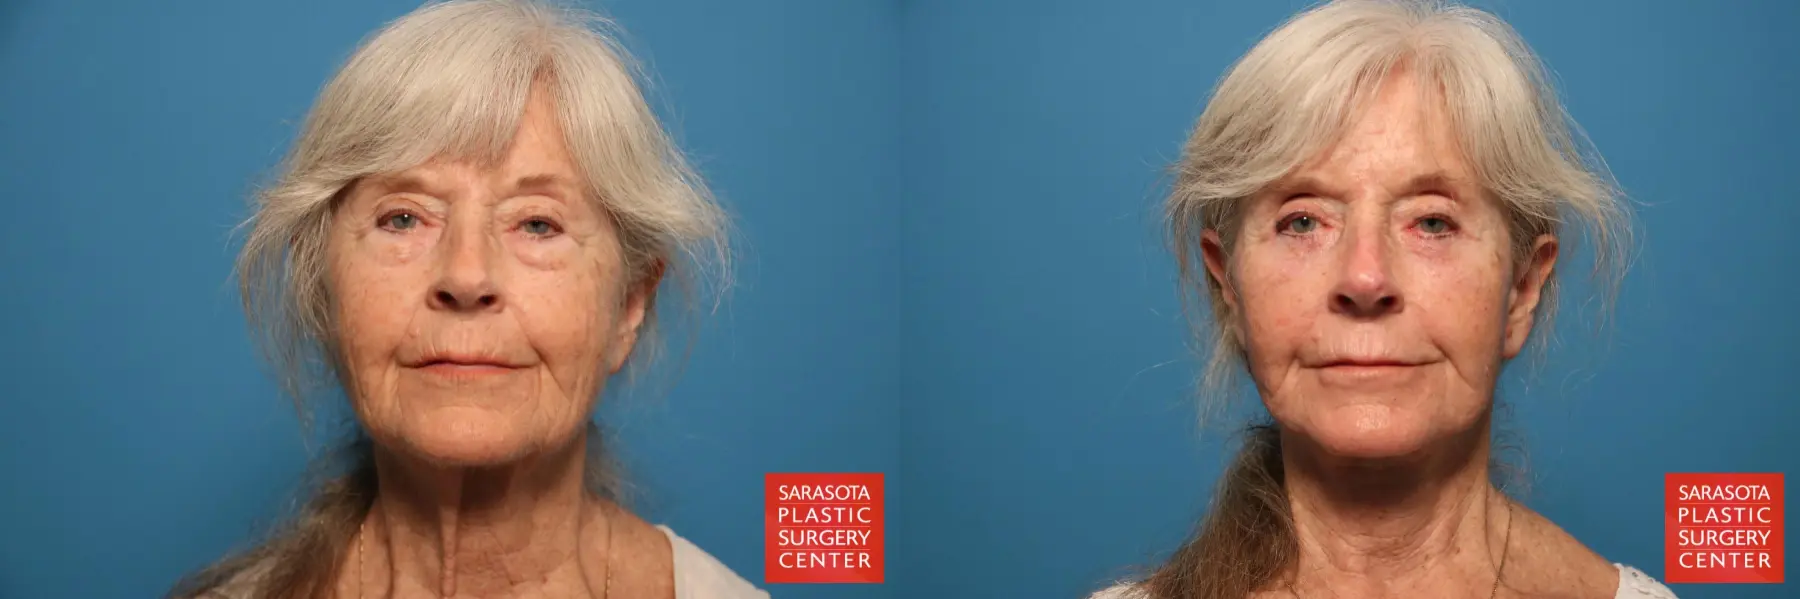 Facelift-revision: Patient 1 - Before and After  